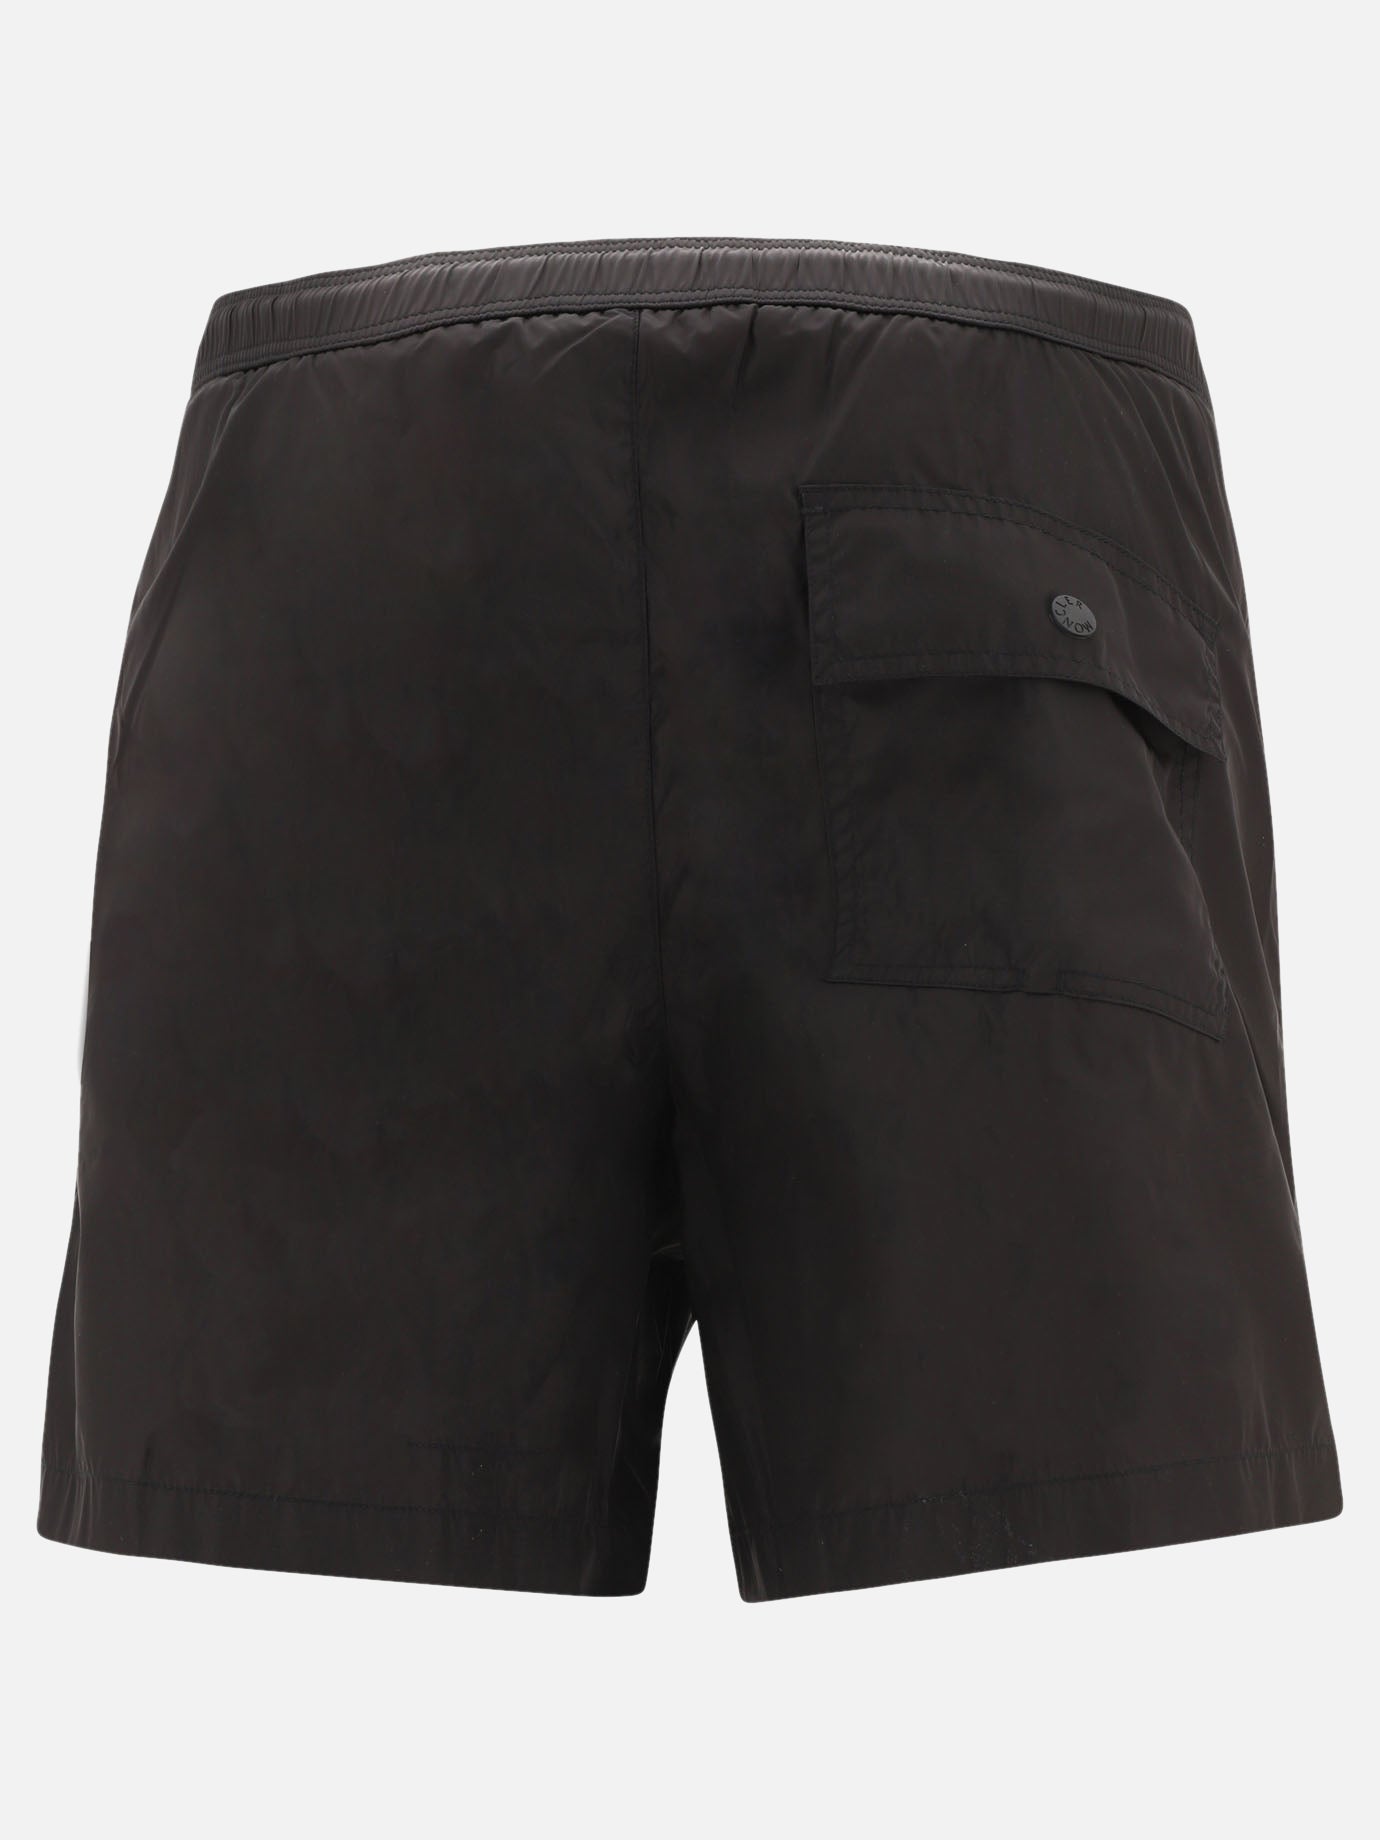 Swimming shorts with patch